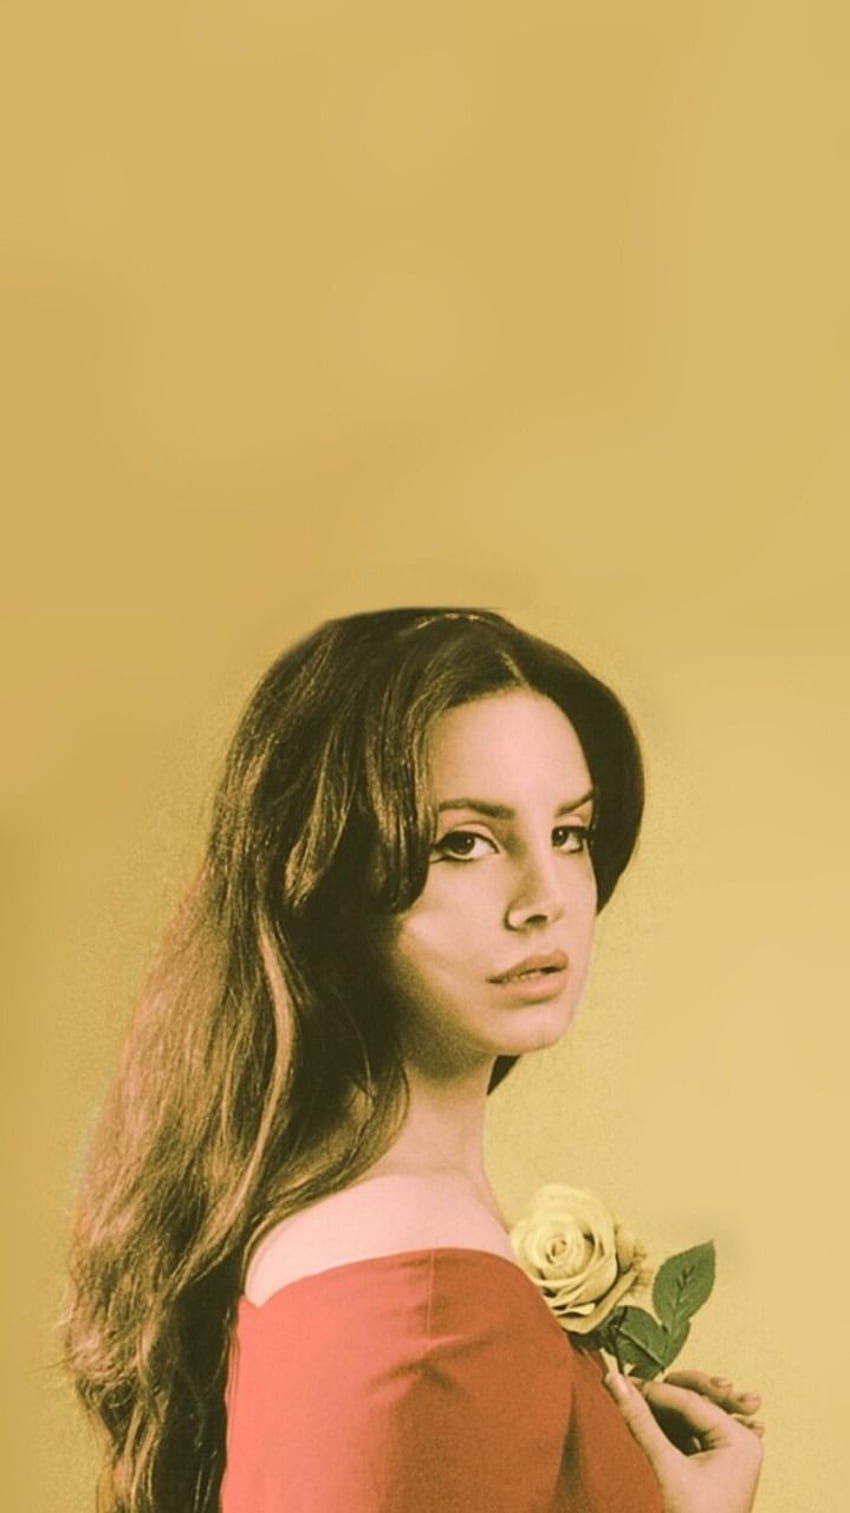 SalmonPeach aesthetic Lana Del Rey wallpaper for all the wonderful people  in this sub 33  rlanadelrey